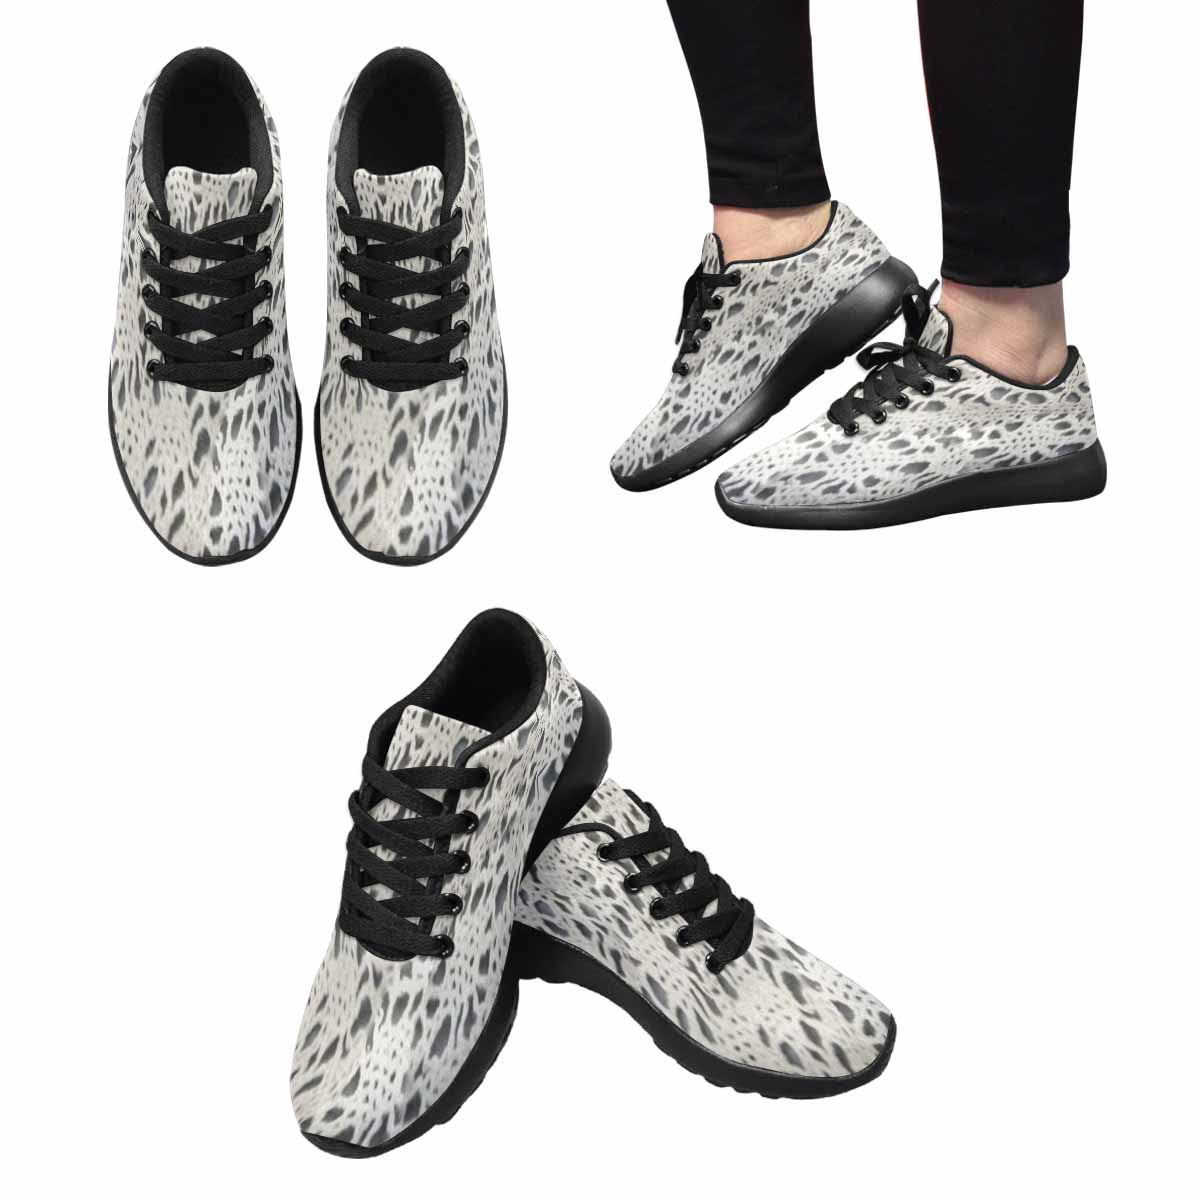 Victorian lace print, womens cute casual or running sneakers, design 12